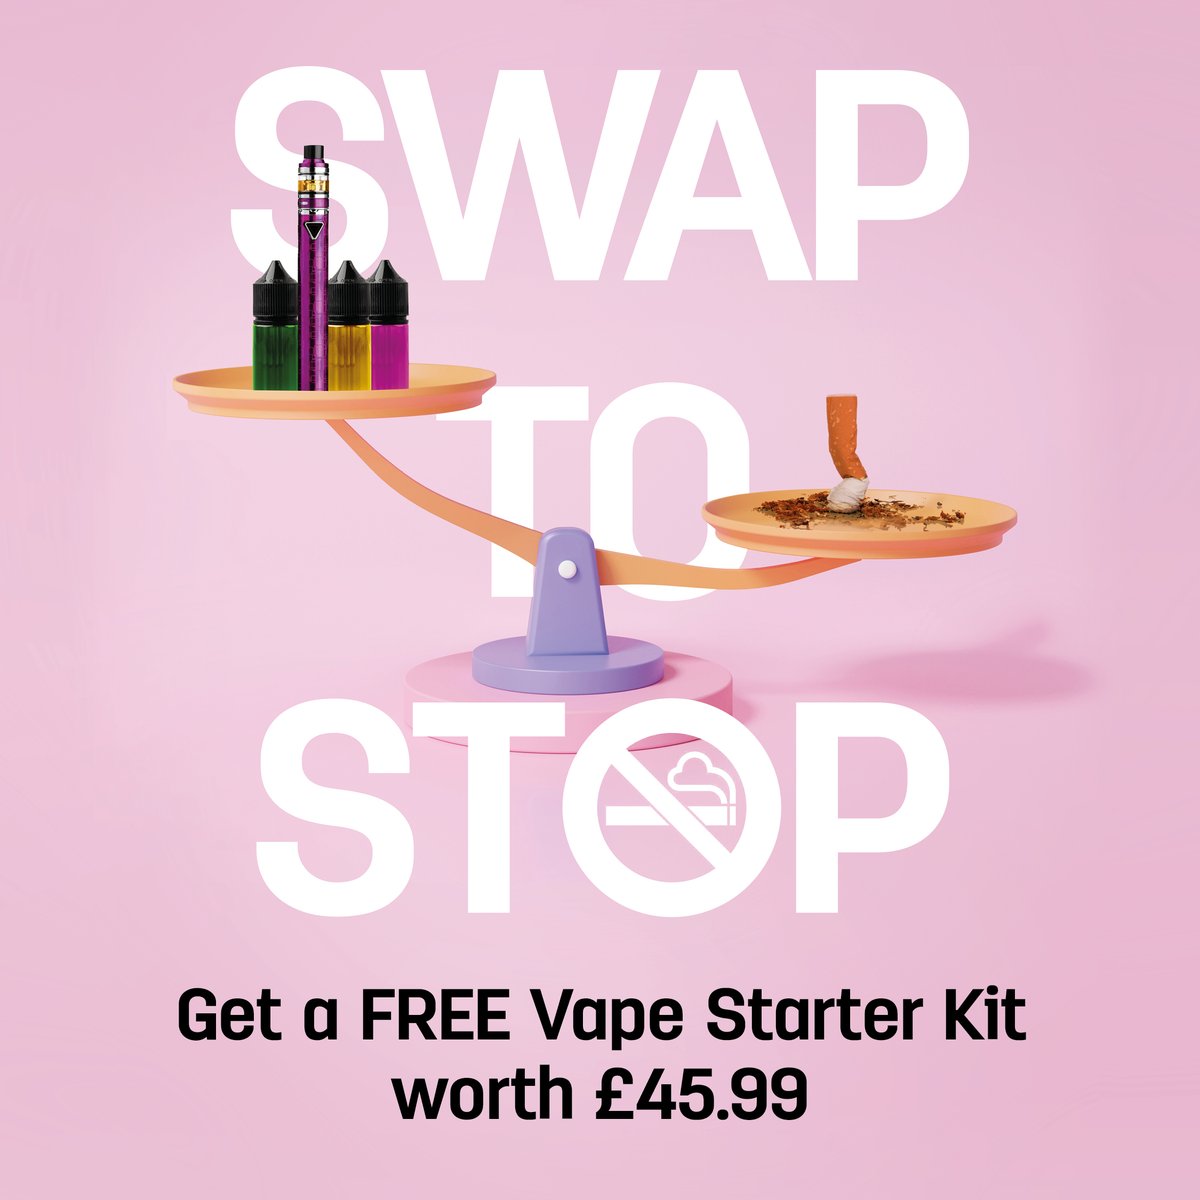 Vaping is a really effective tool for quitting smoking. Around two thirds of people who vape and get expert support quit smoking. Vaping is less harmful as it exposes you to far fewer toxins. Find out more, contact the Medway Stop Smoking Service. ➡️ orlo.uk/stop_smoking_0…